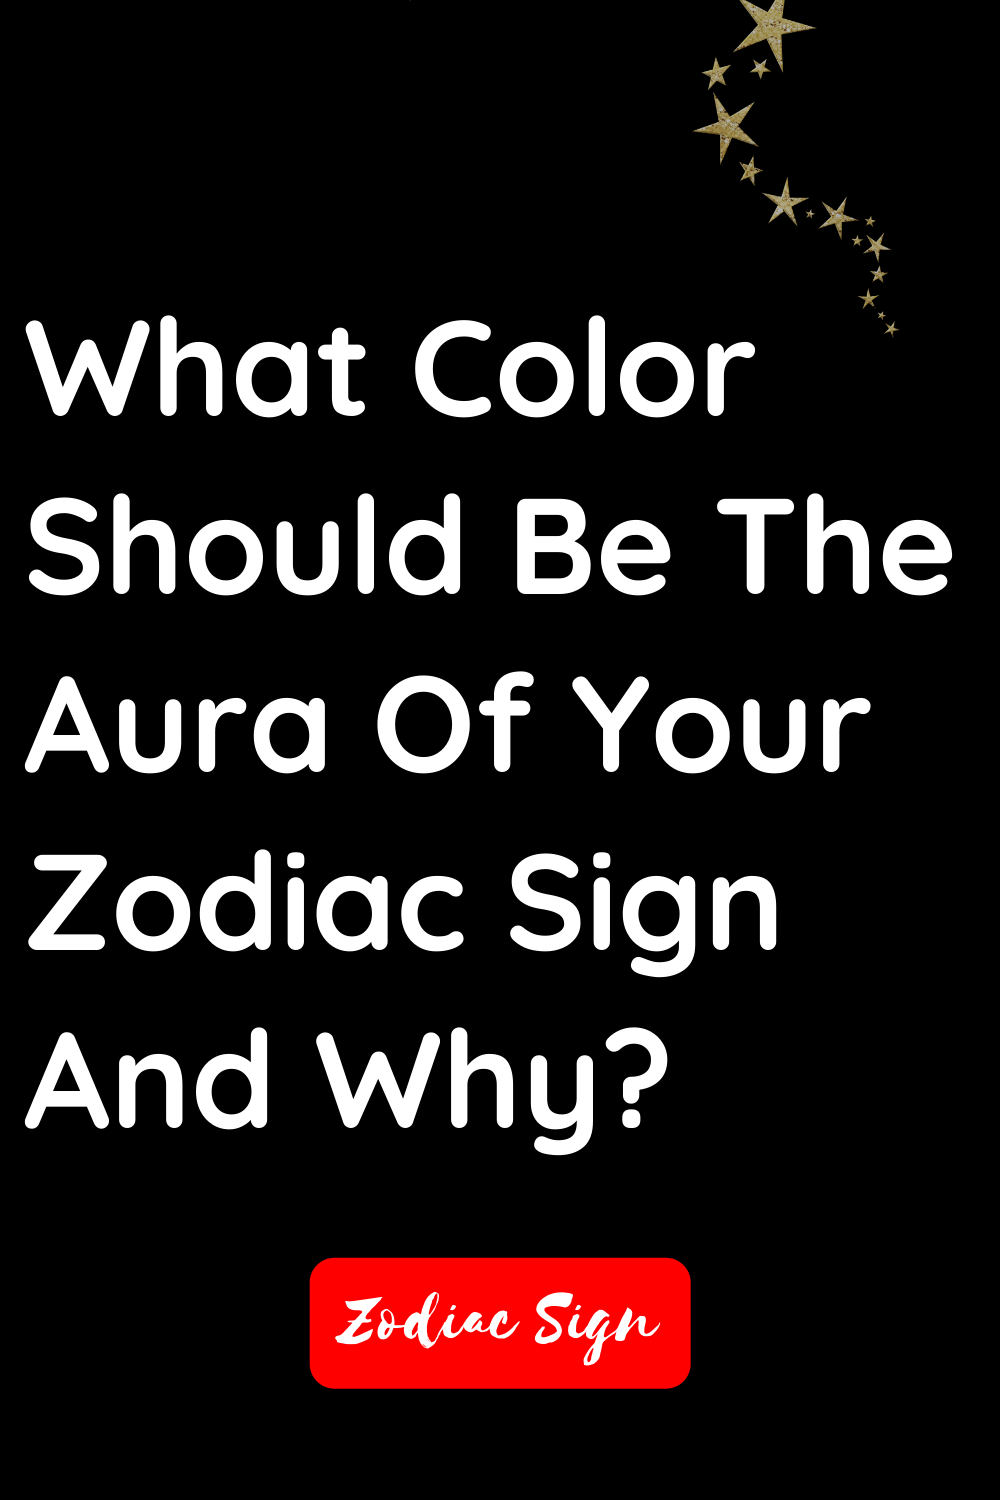 What color should be the aura of your zodiac sign and why?